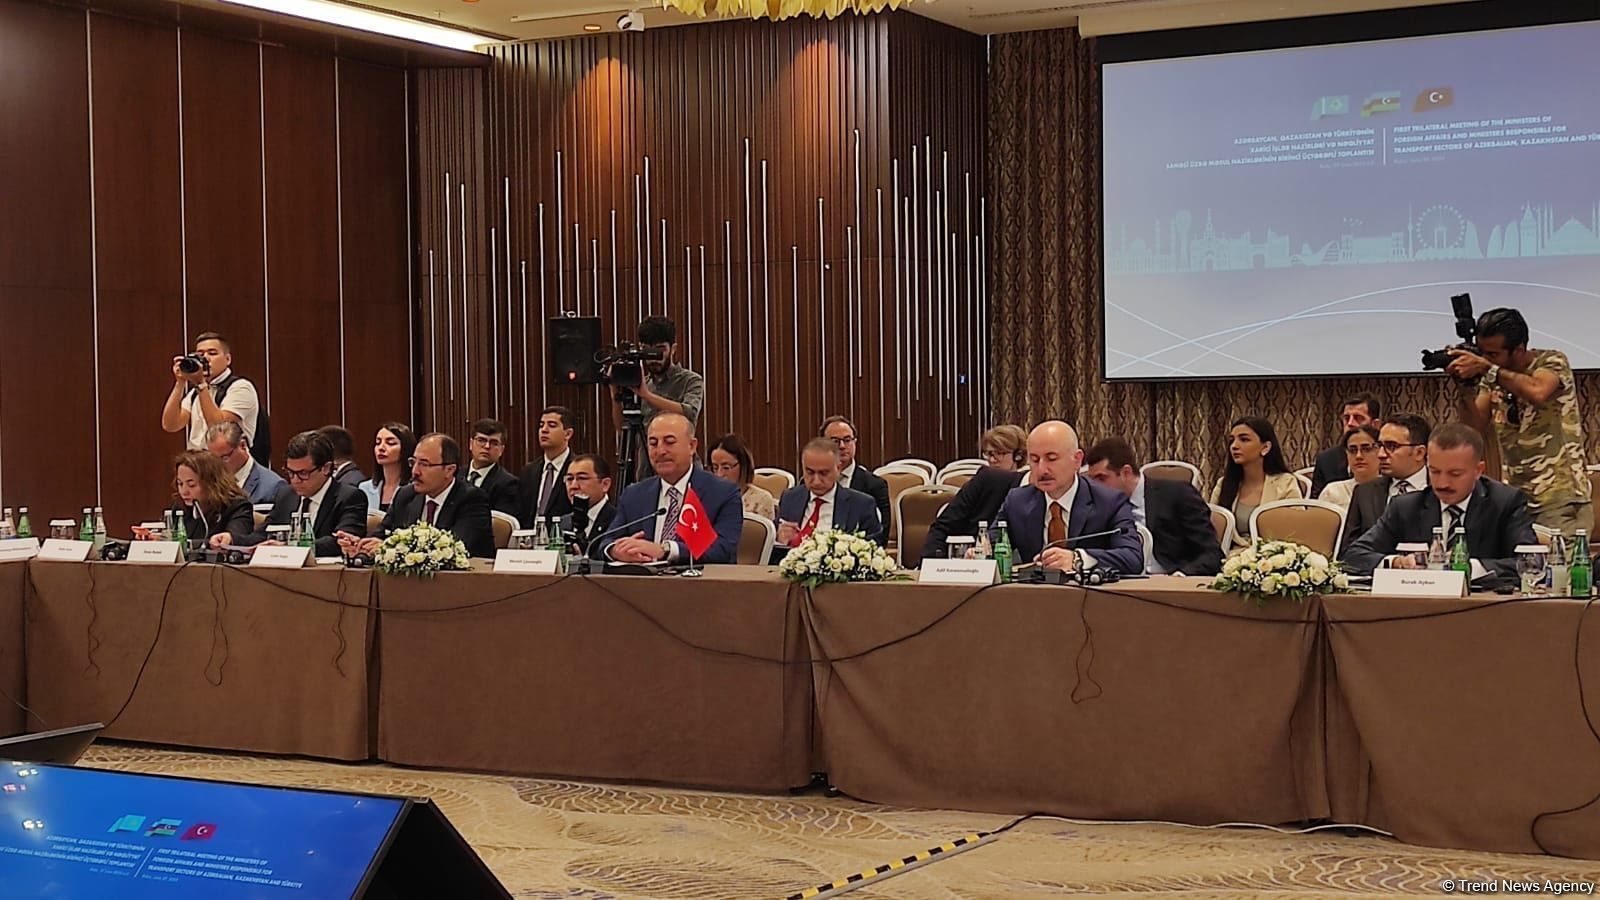 Meeting of Azerbaijani, Turkish and Kazakh FMs serving to ensure security of region – FM [PHOTO] - Gallery Image